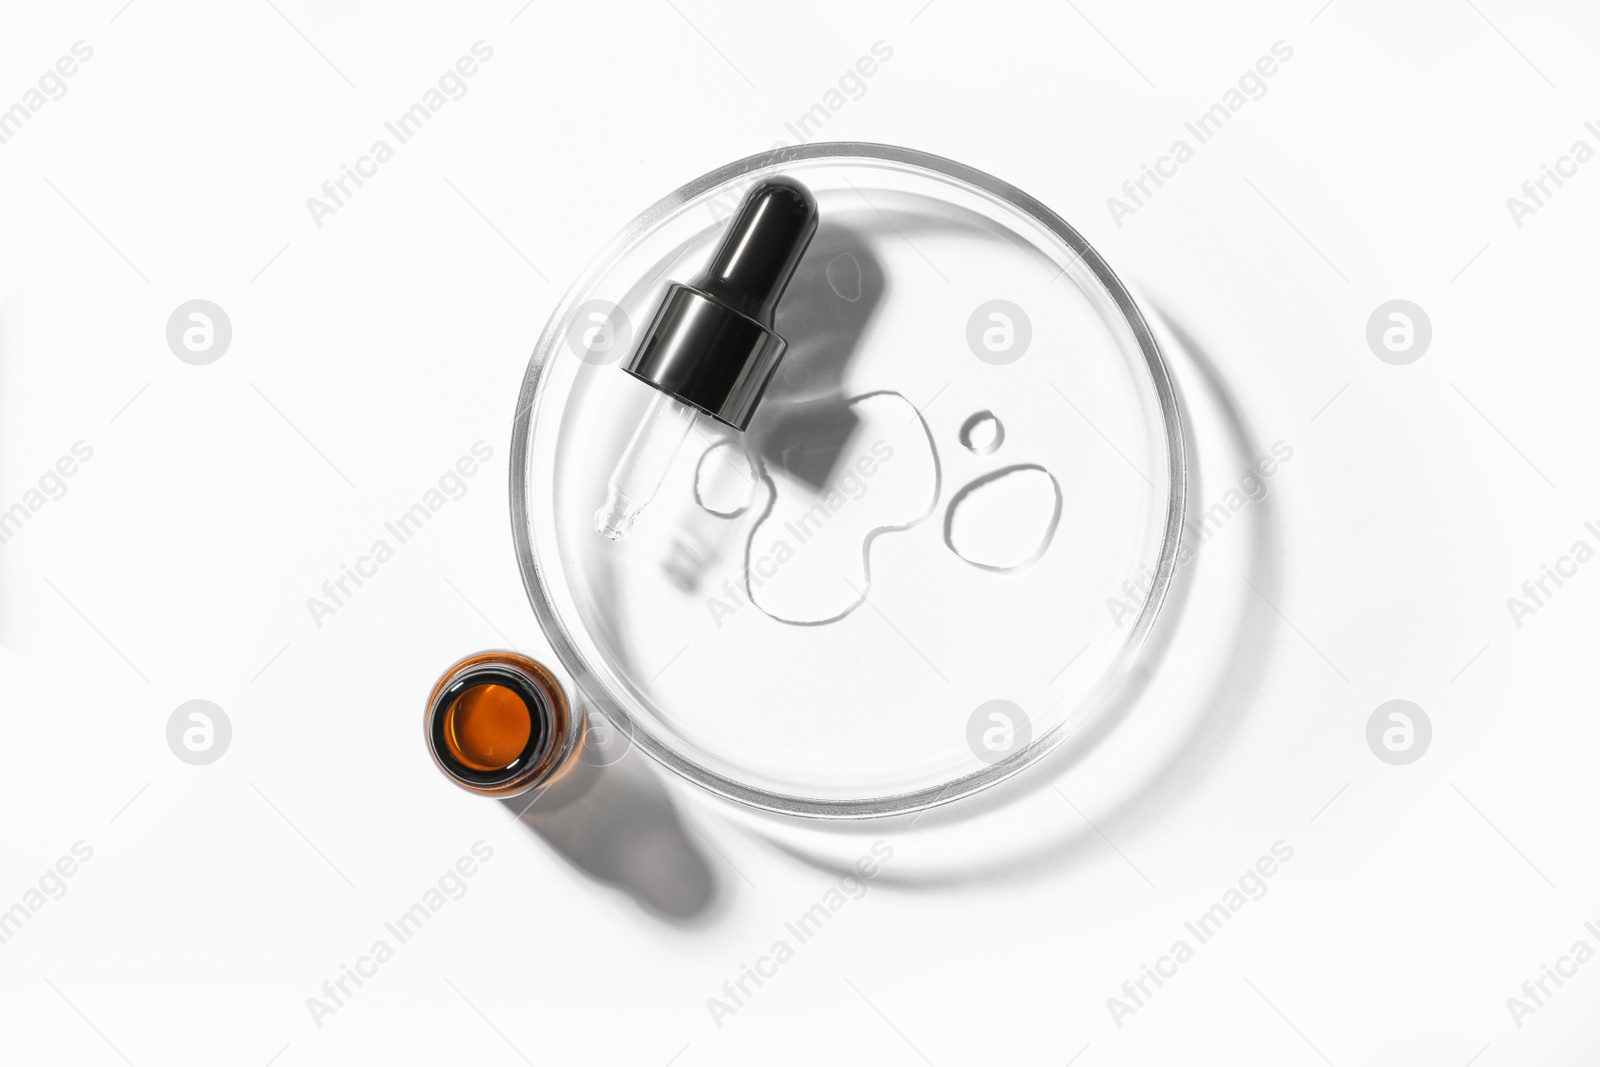 Photo of Petri dish with pipette and bottle on white background, top view